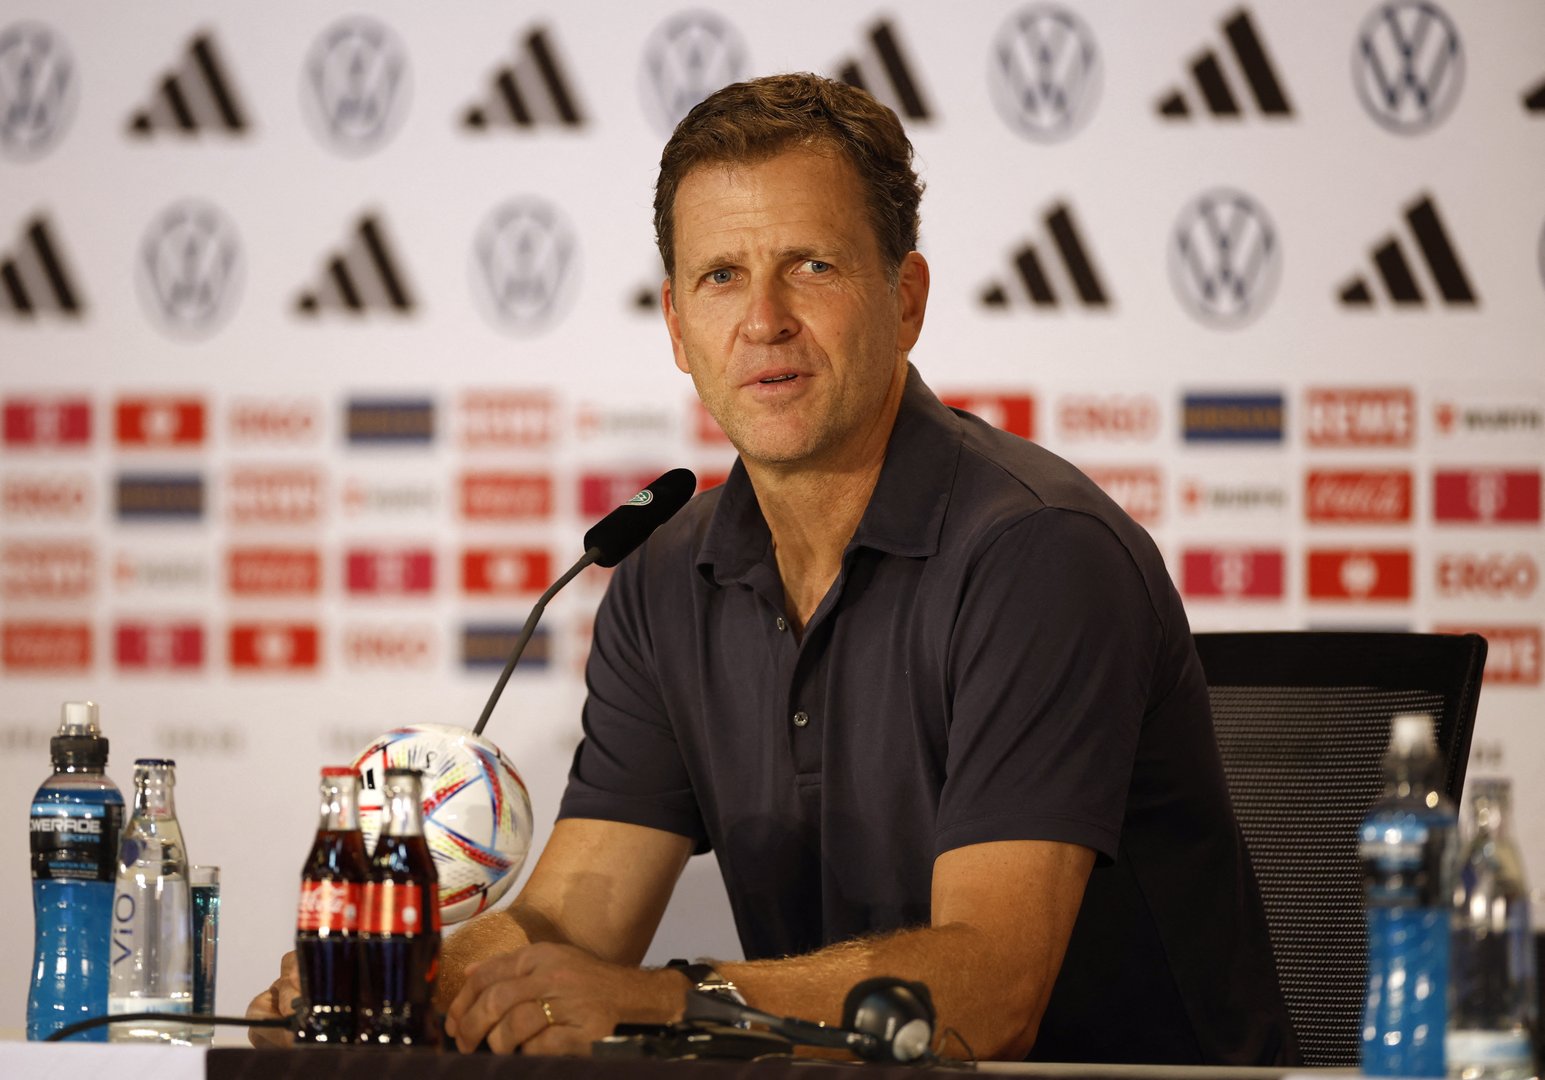 image Timing of World Cup beer ban and armbands plan are unfortunate, says Germany team chief